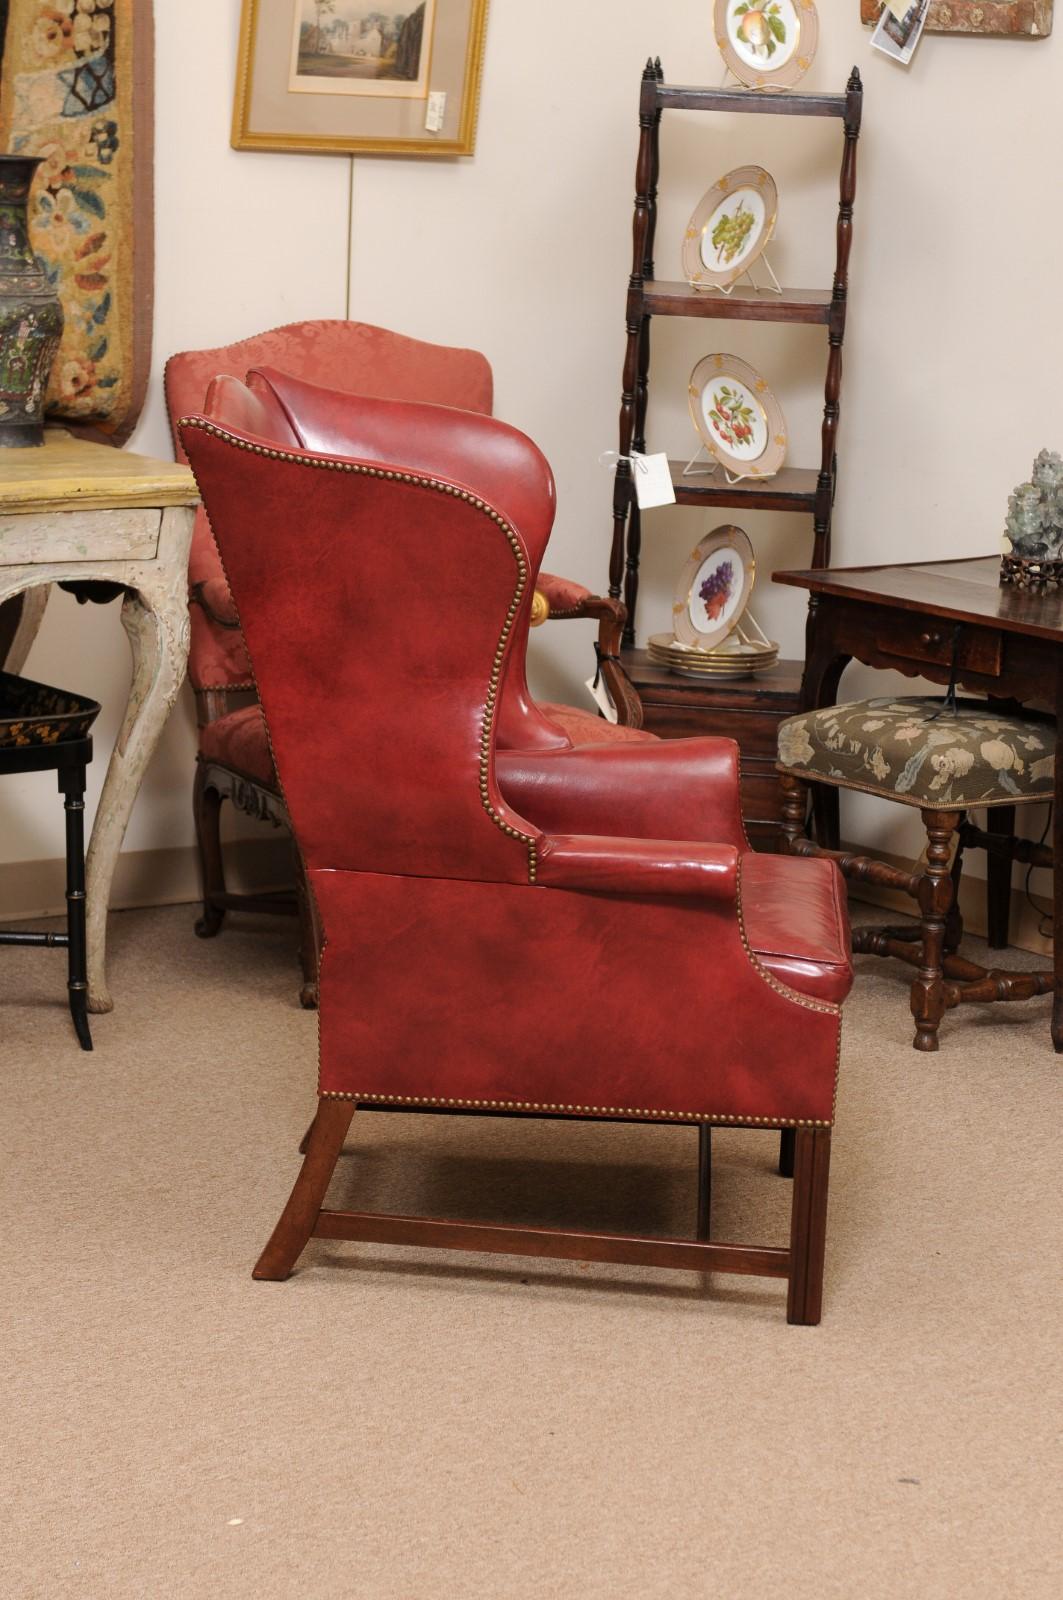 20th Century English Wing Chair in Mahogany & Red Leather Upholstery with Brass  For Sale 6